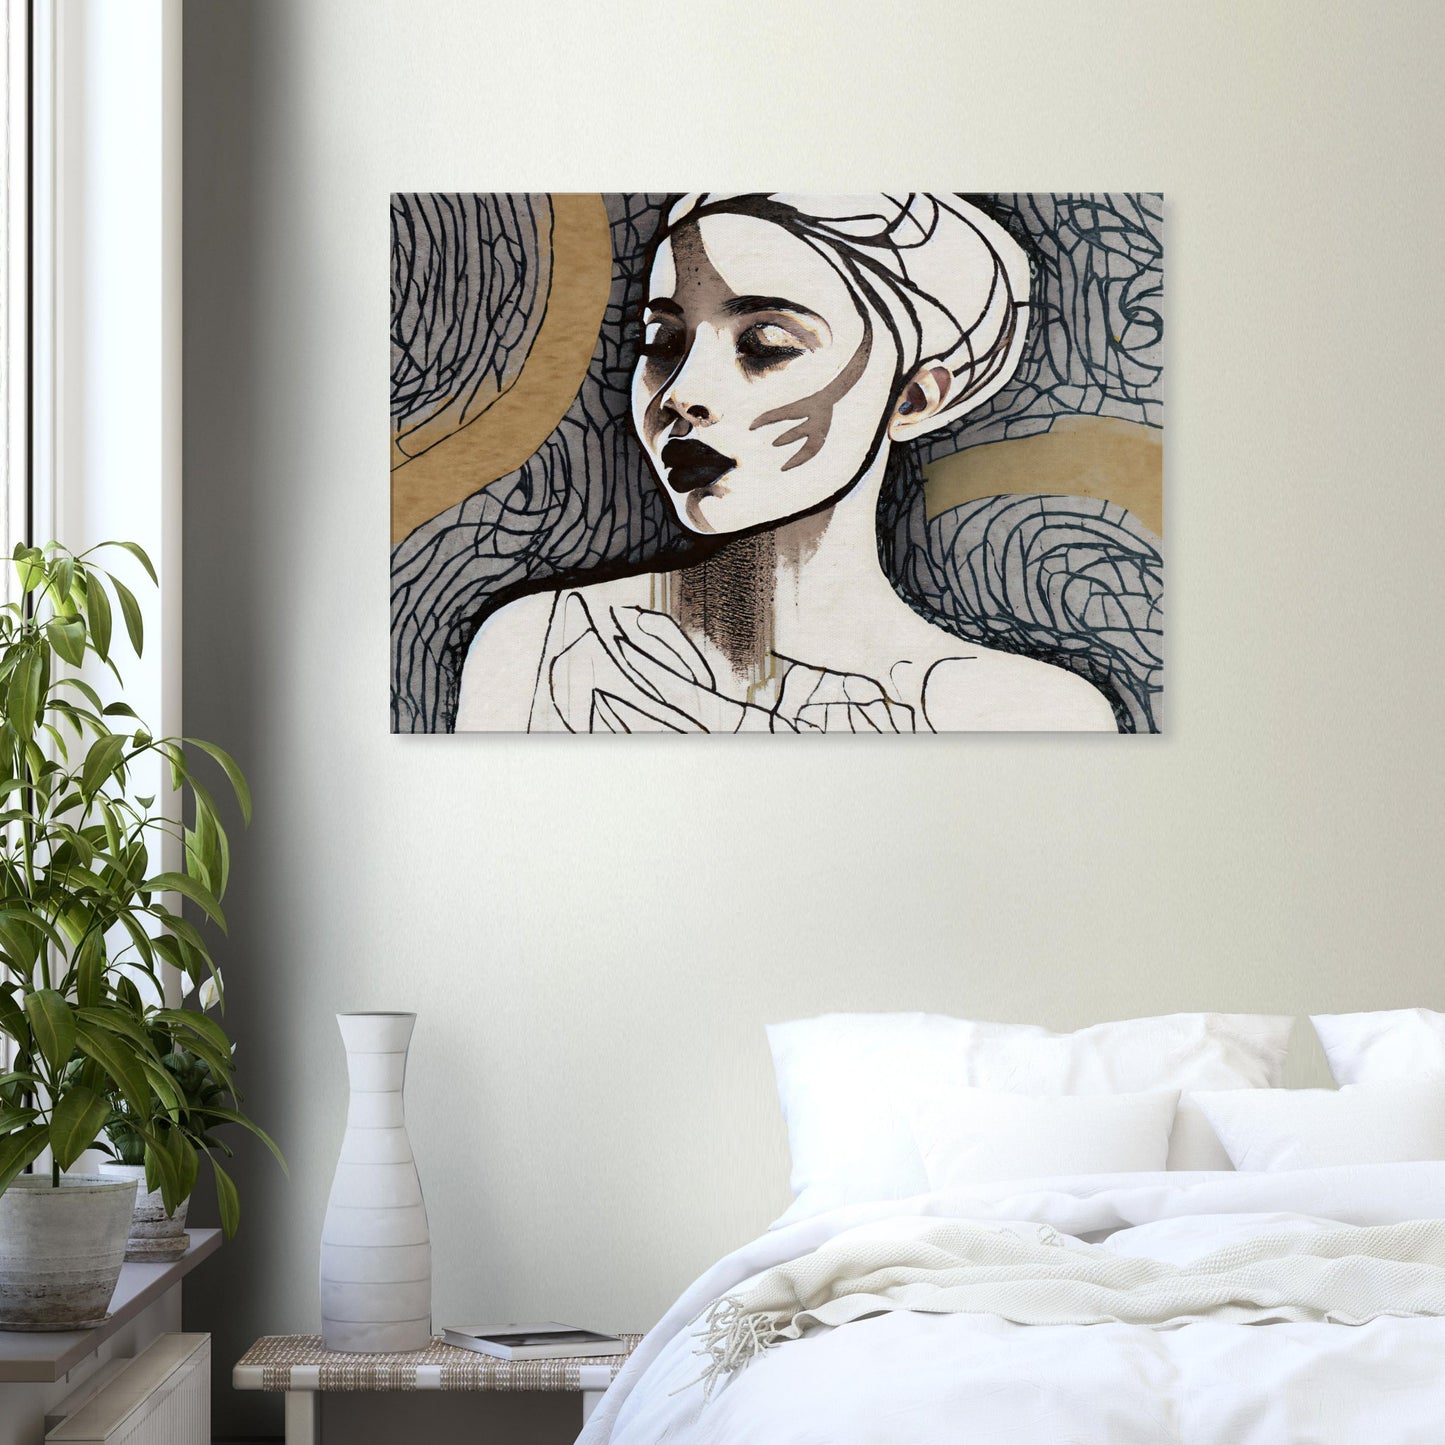 Canvas with abstract line pattern by Posterify Design - Posterify